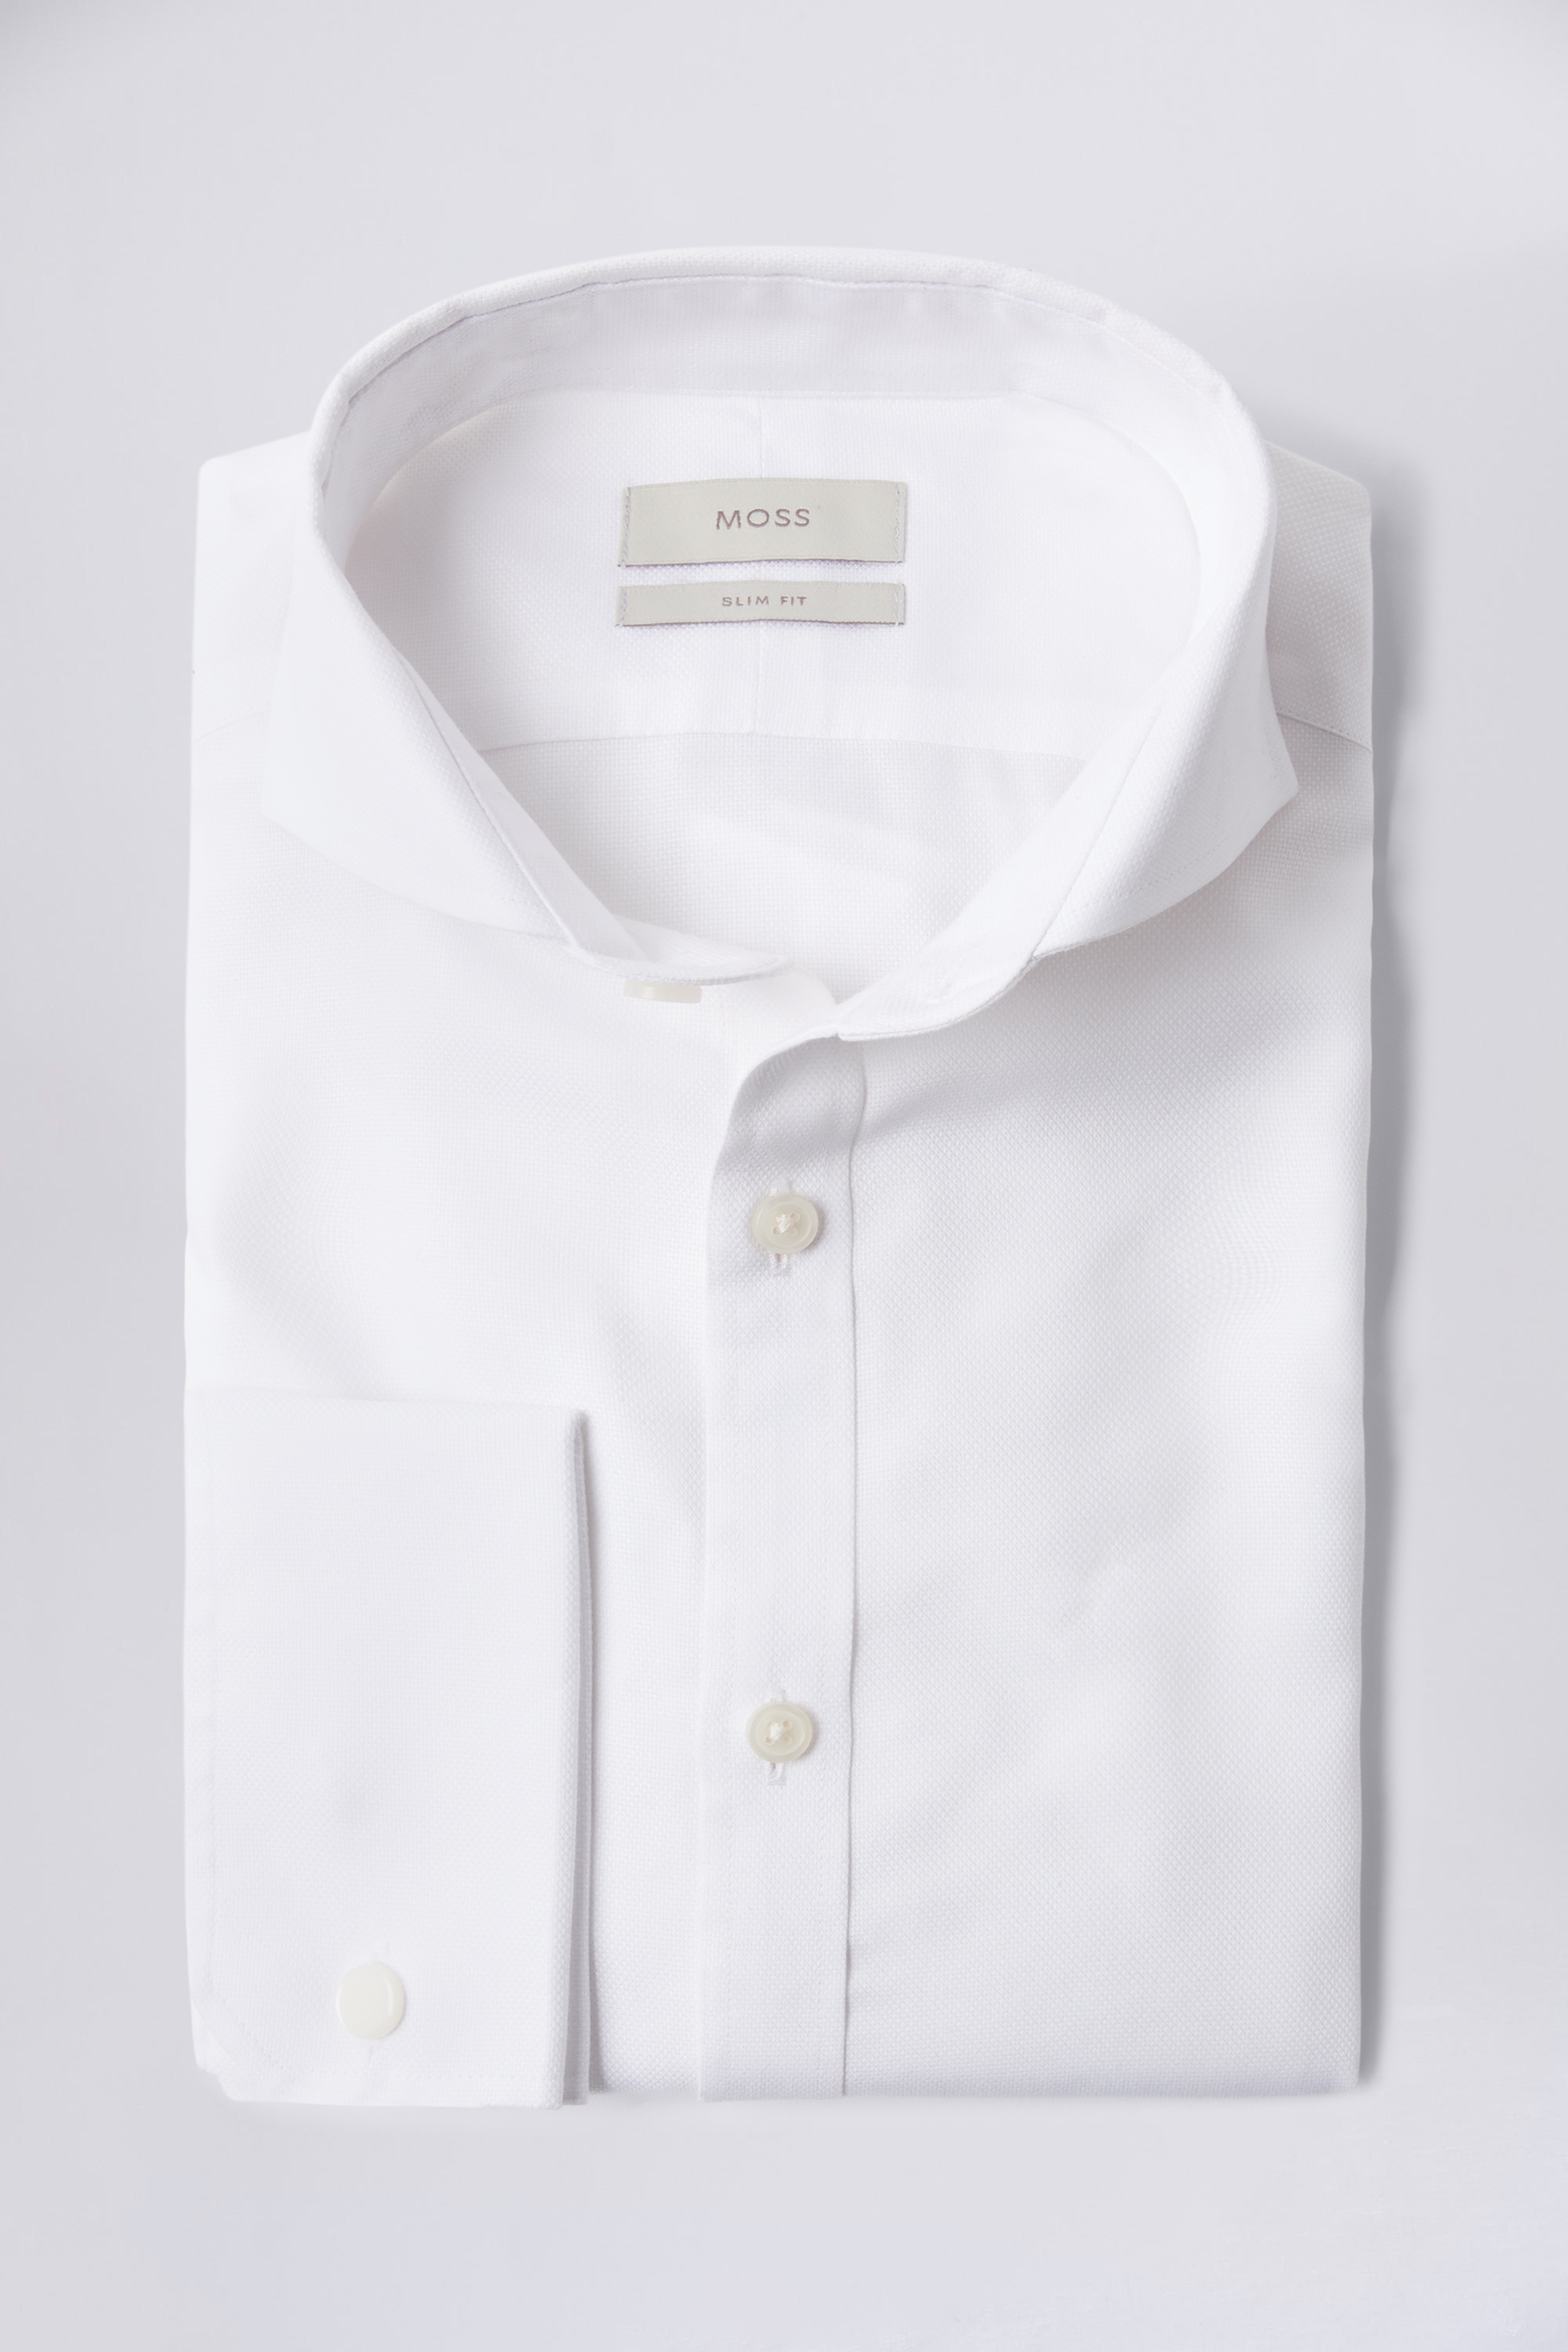 Slim Fit White Royal Oxford Non-Iron Shirt | Buy Online at Moss